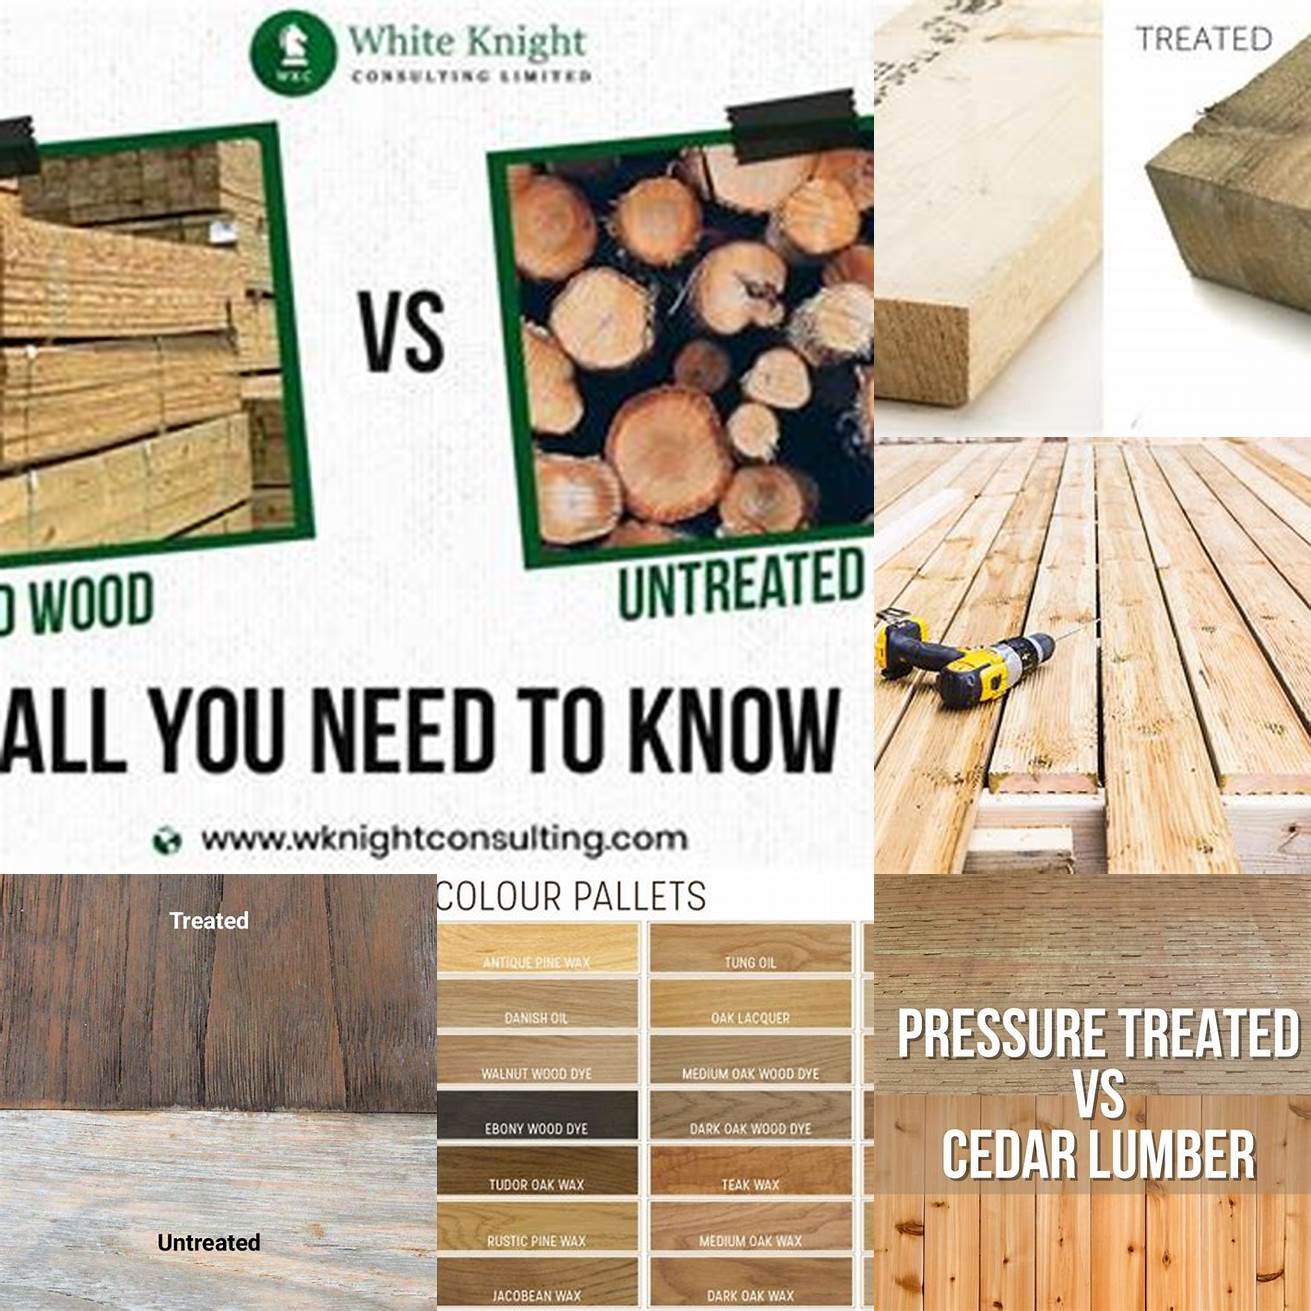 Comparing treated and untreated wood